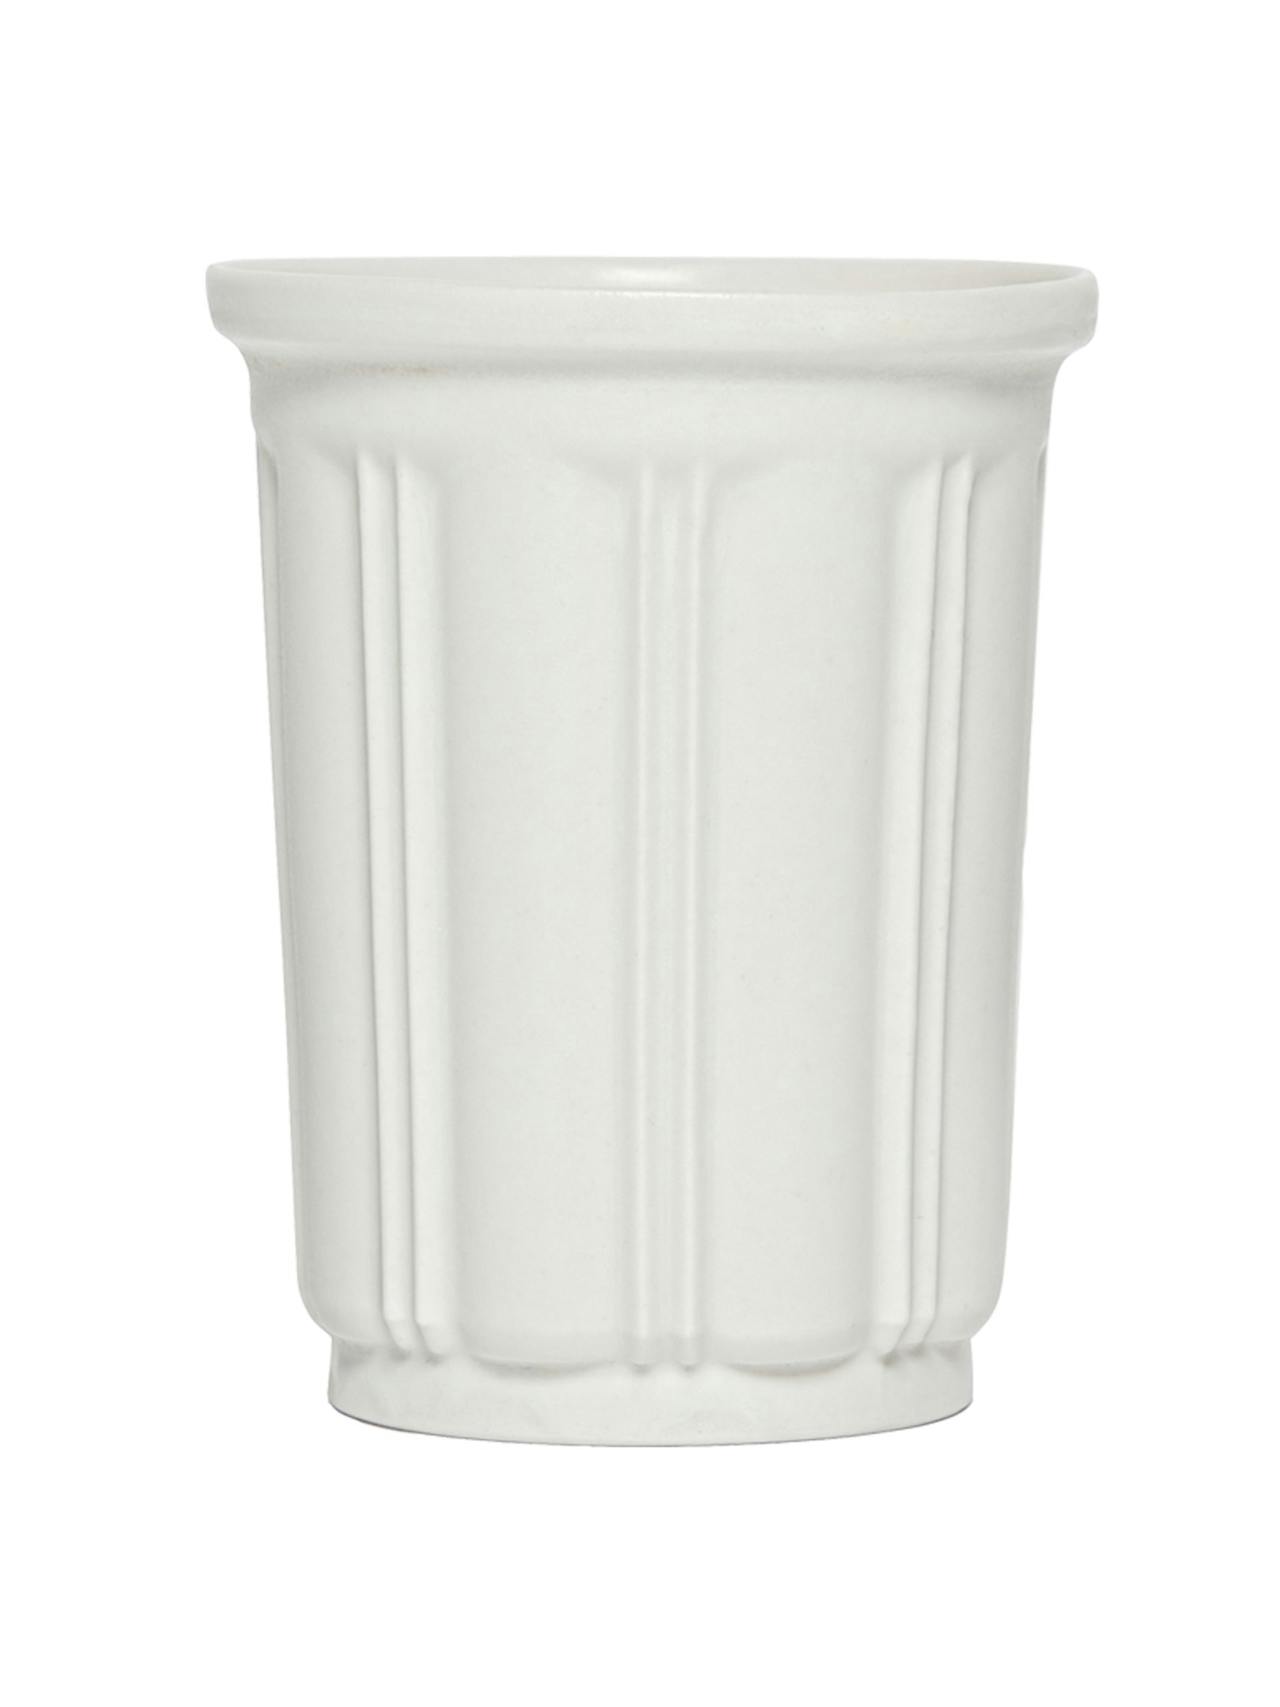 White porcelain cup